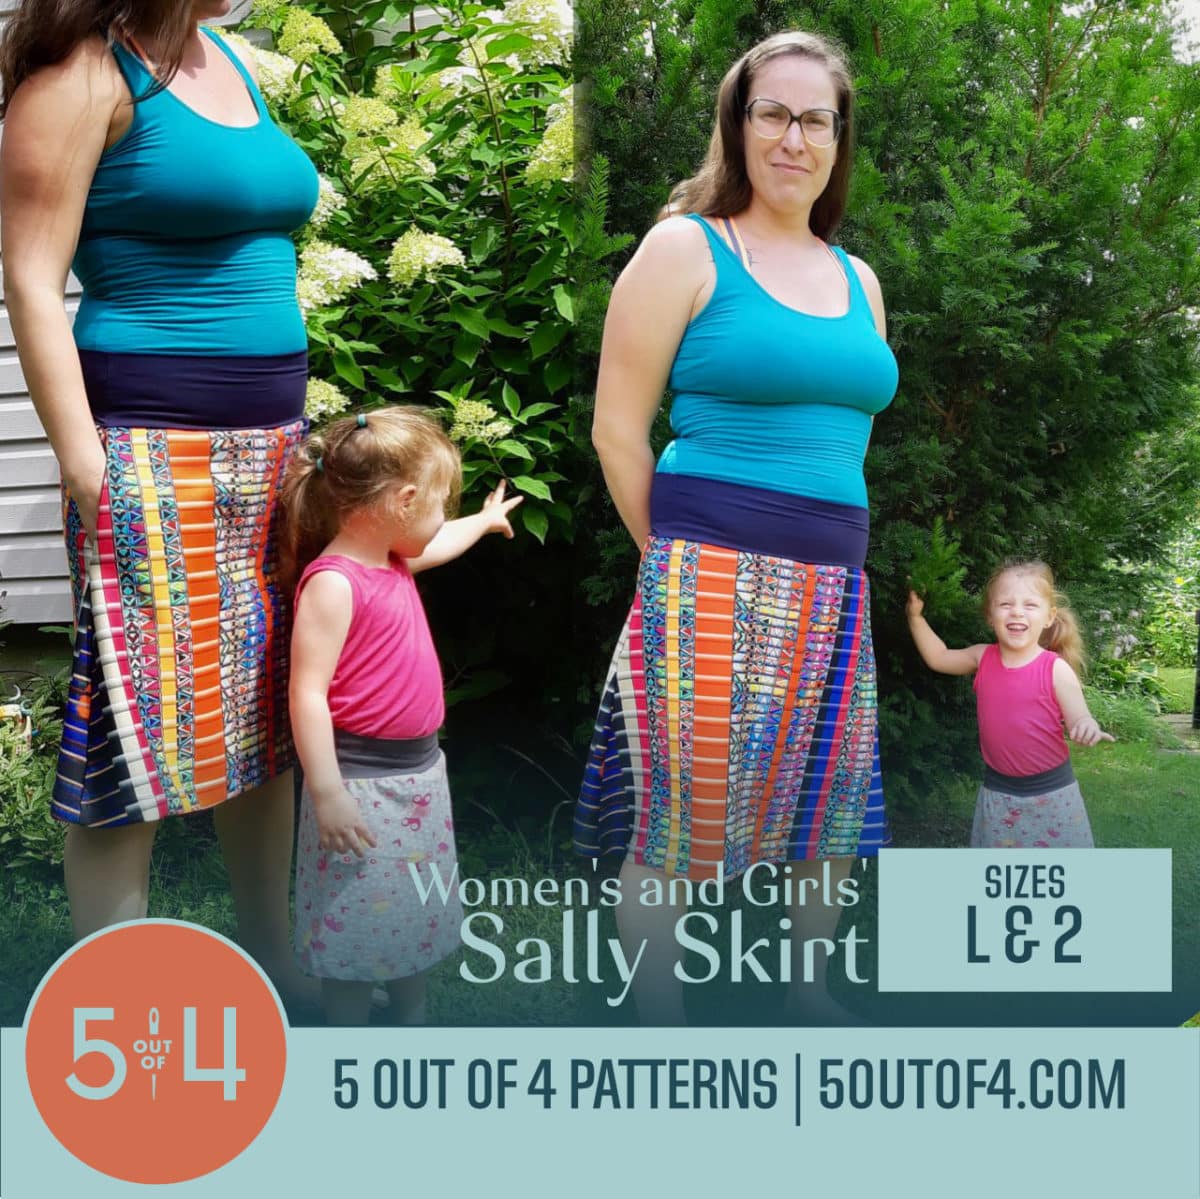 Sally Skirt Bundle - 5 out of 4 Patterns